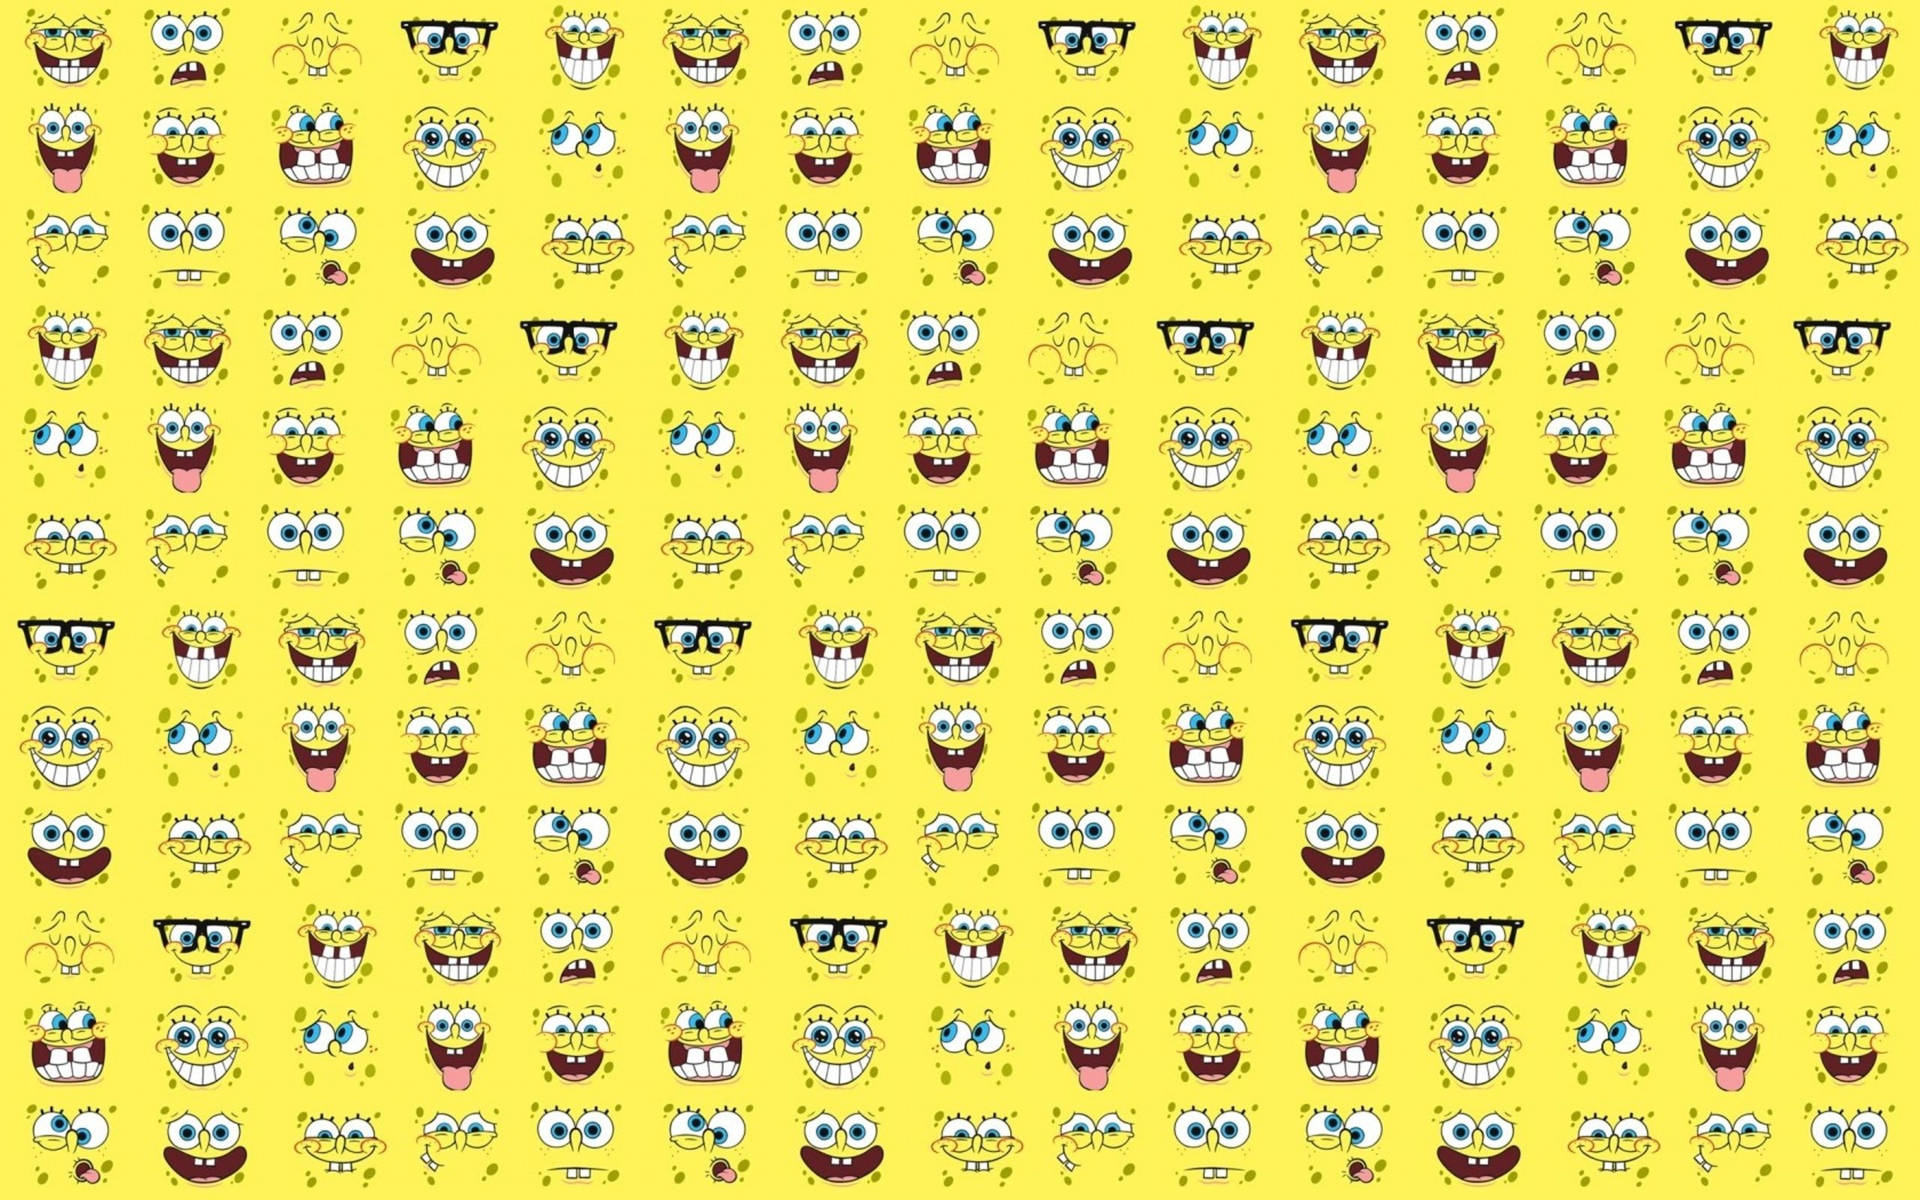 Join Spongebob Squarepants on his fun and exciting adventures! Wallpaper